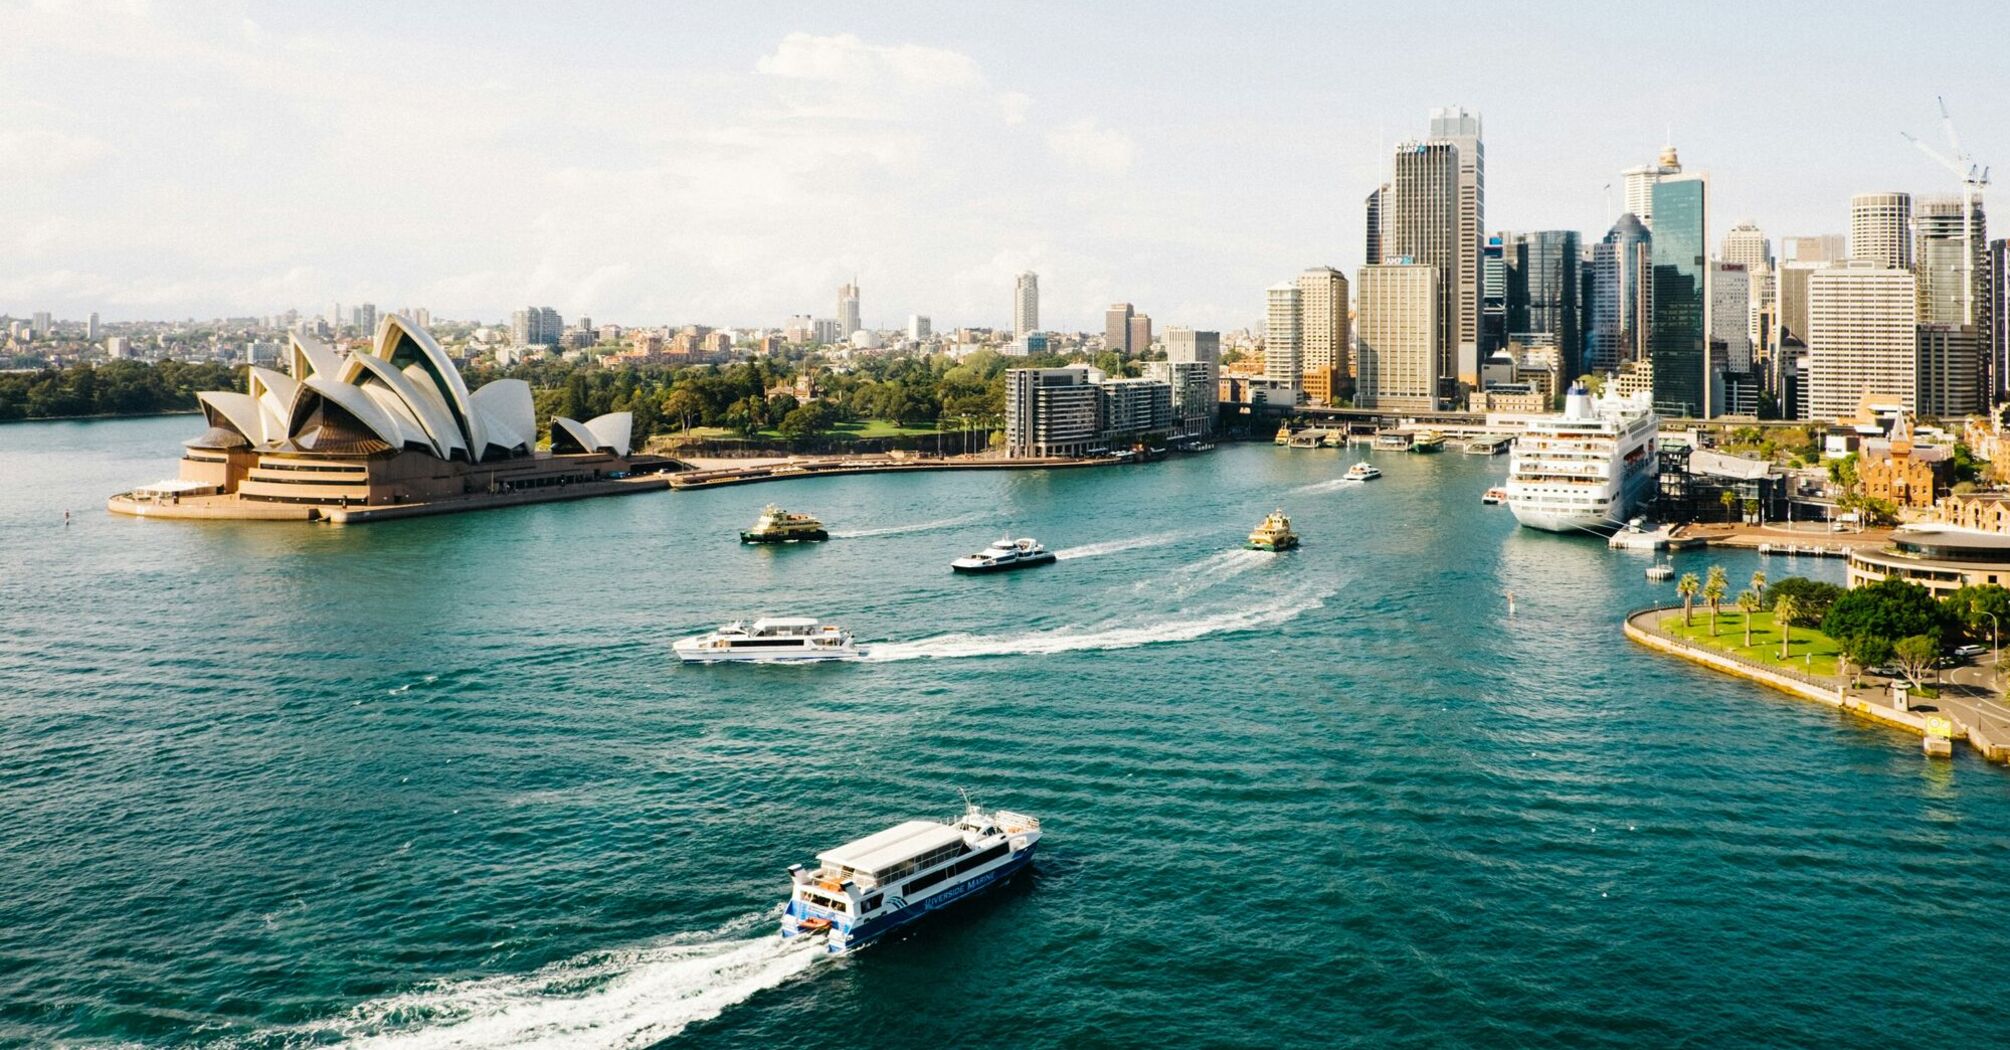 A panoramic view of Sydney Harbour, featuring the iconic Sydney Opera House, surrounded by the city skyline and various boats on the water